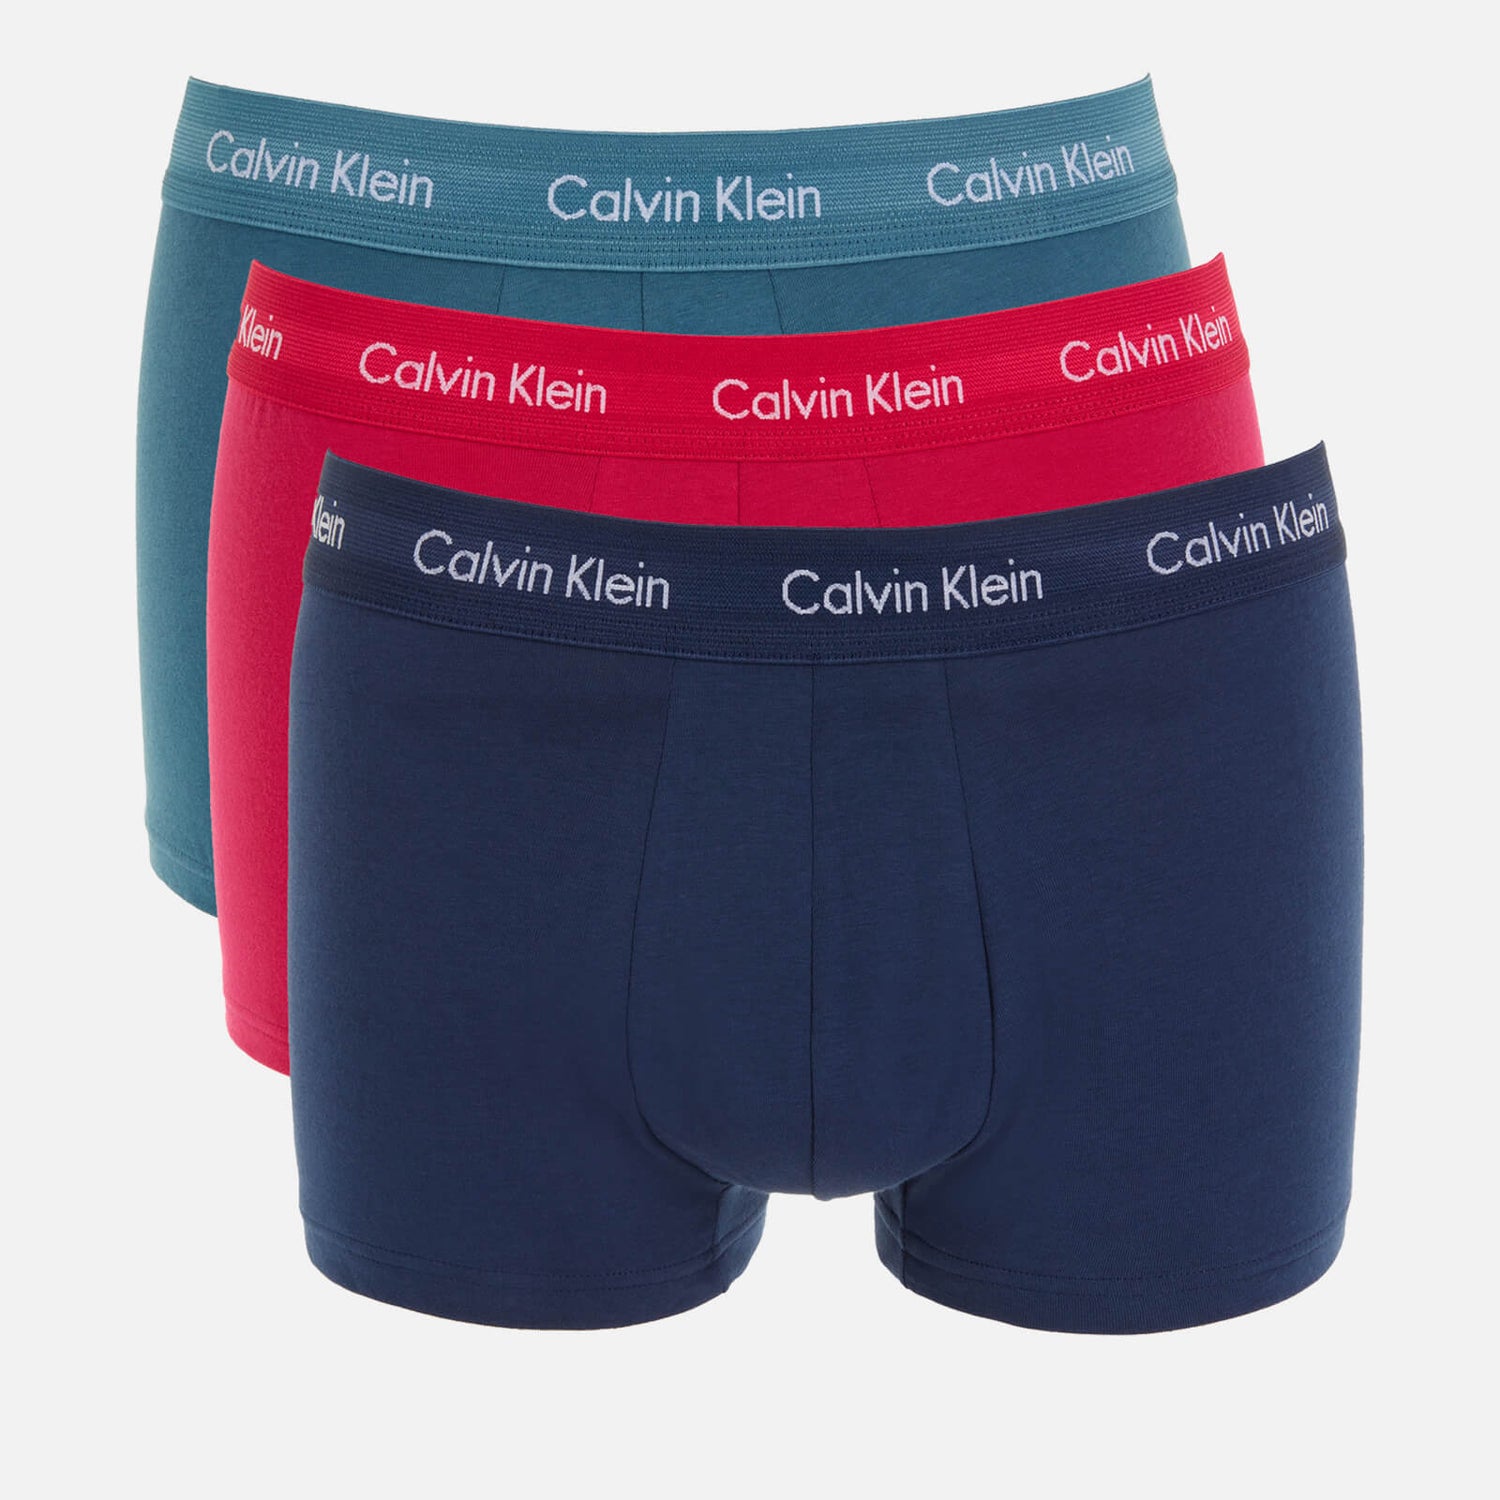 Calvin Klein Men's 3 Pack Low Rise Trunks - Plumberry/Chino Blue/Riverbed